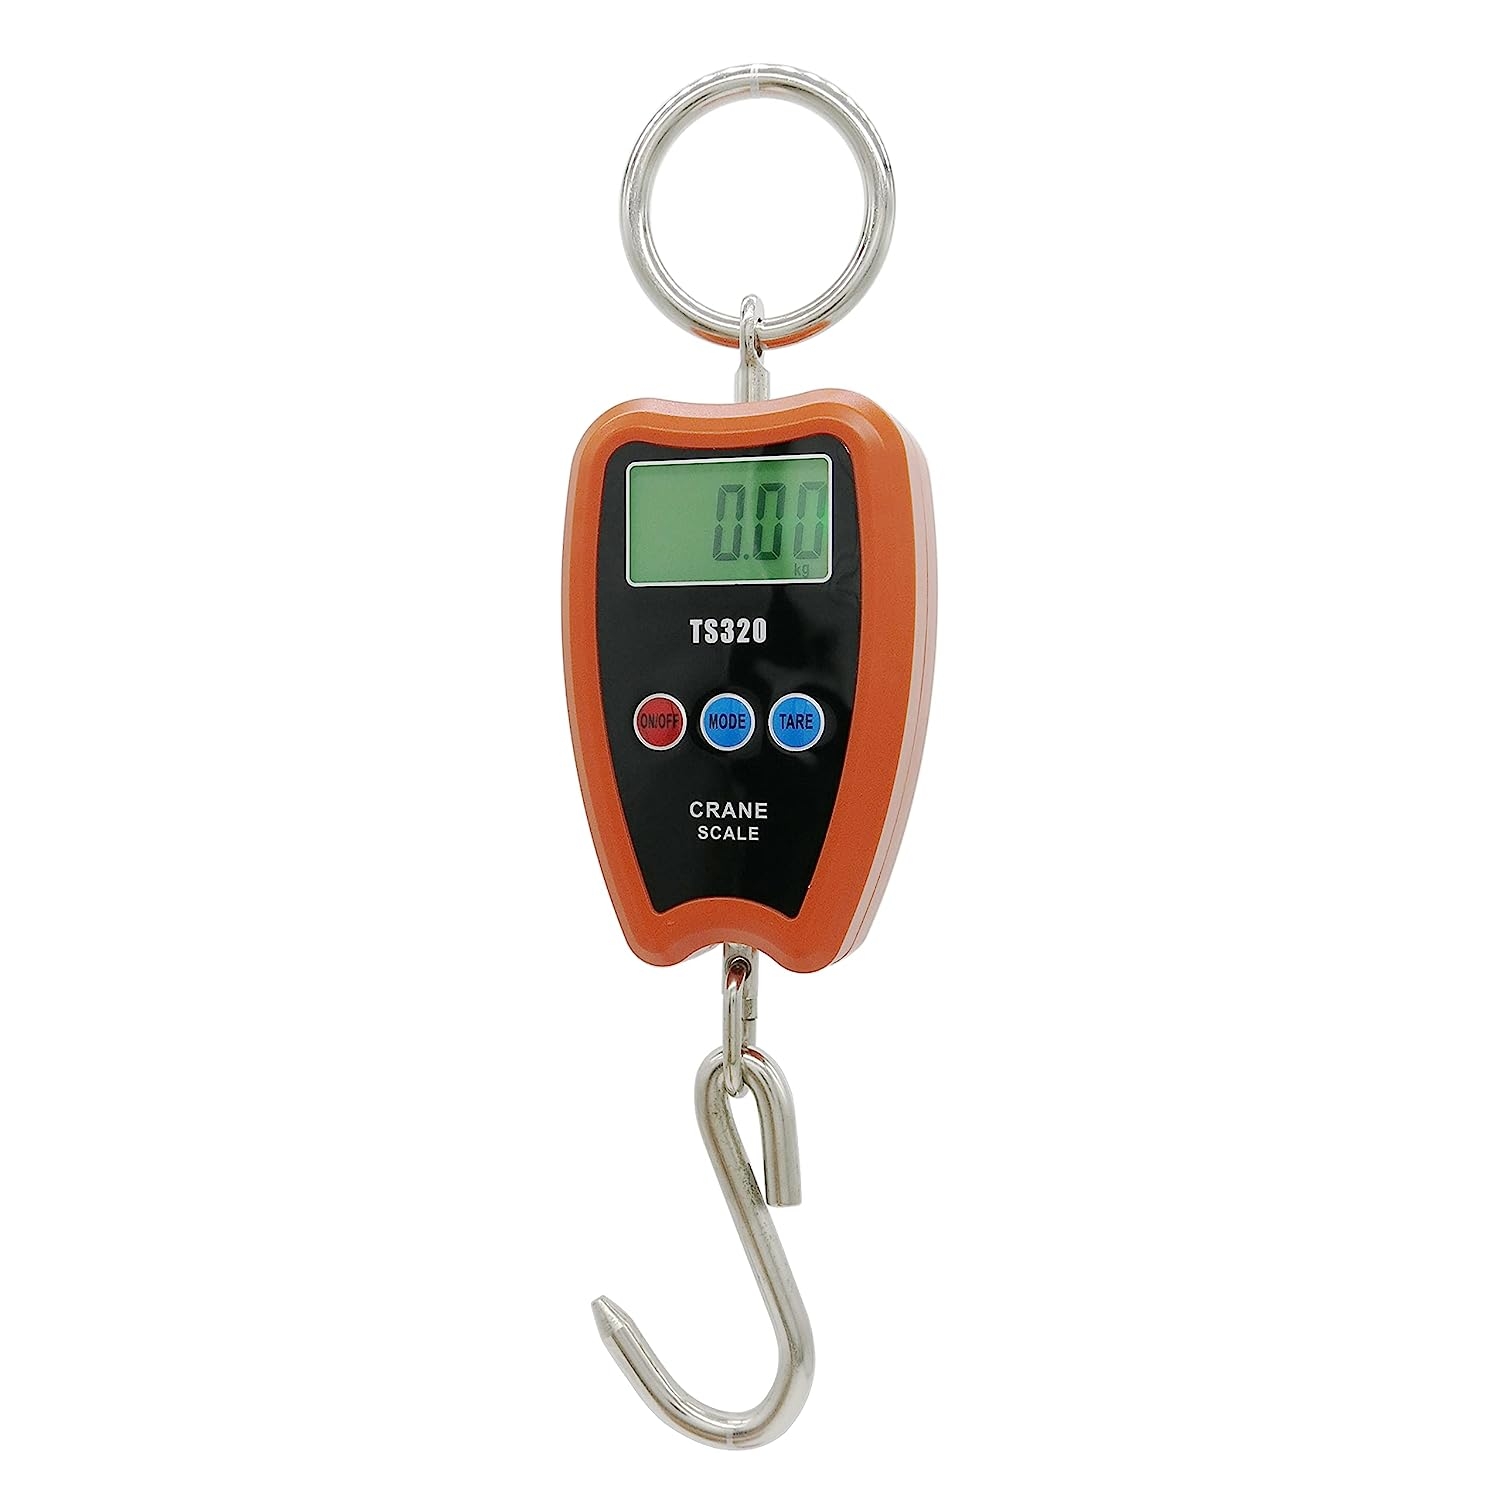 Outmate Digital Crane Scale 300kg/660lbs 200kg/440lbs with LED Handheld Mini Hanging Scale for Garage Farm Hunting Fishing